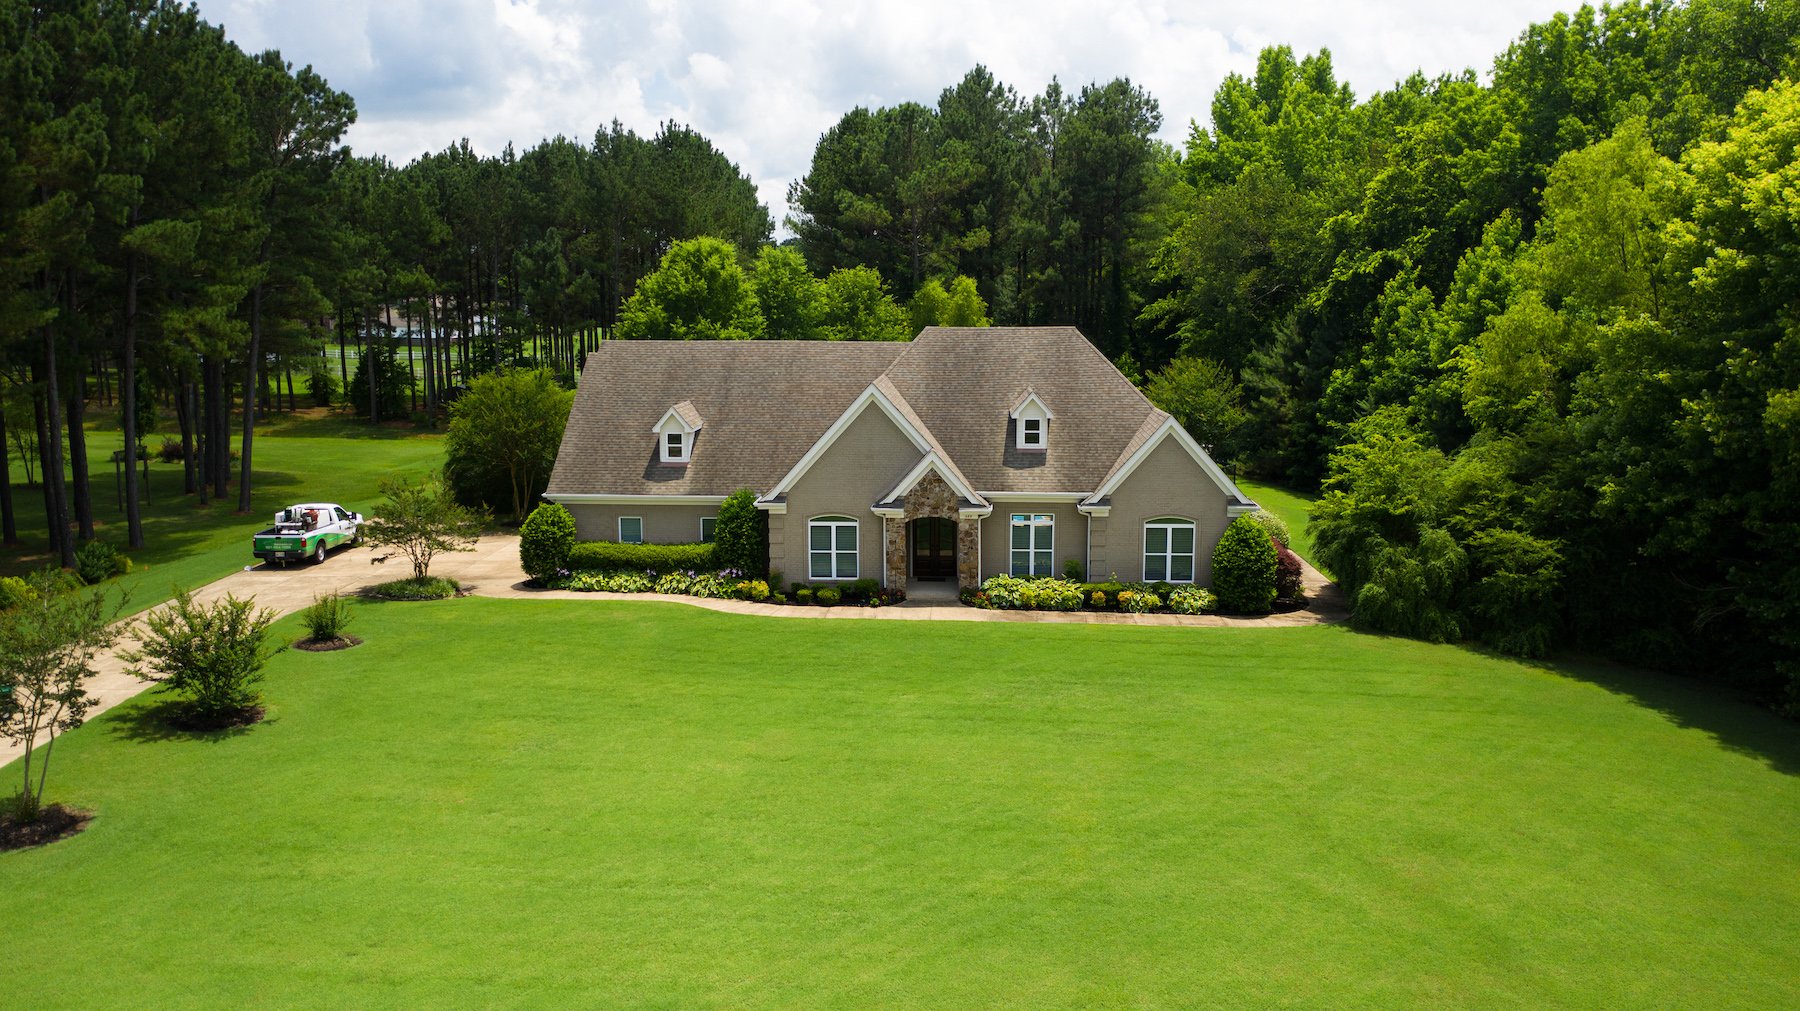 Lush green lawn in Tennessee heat